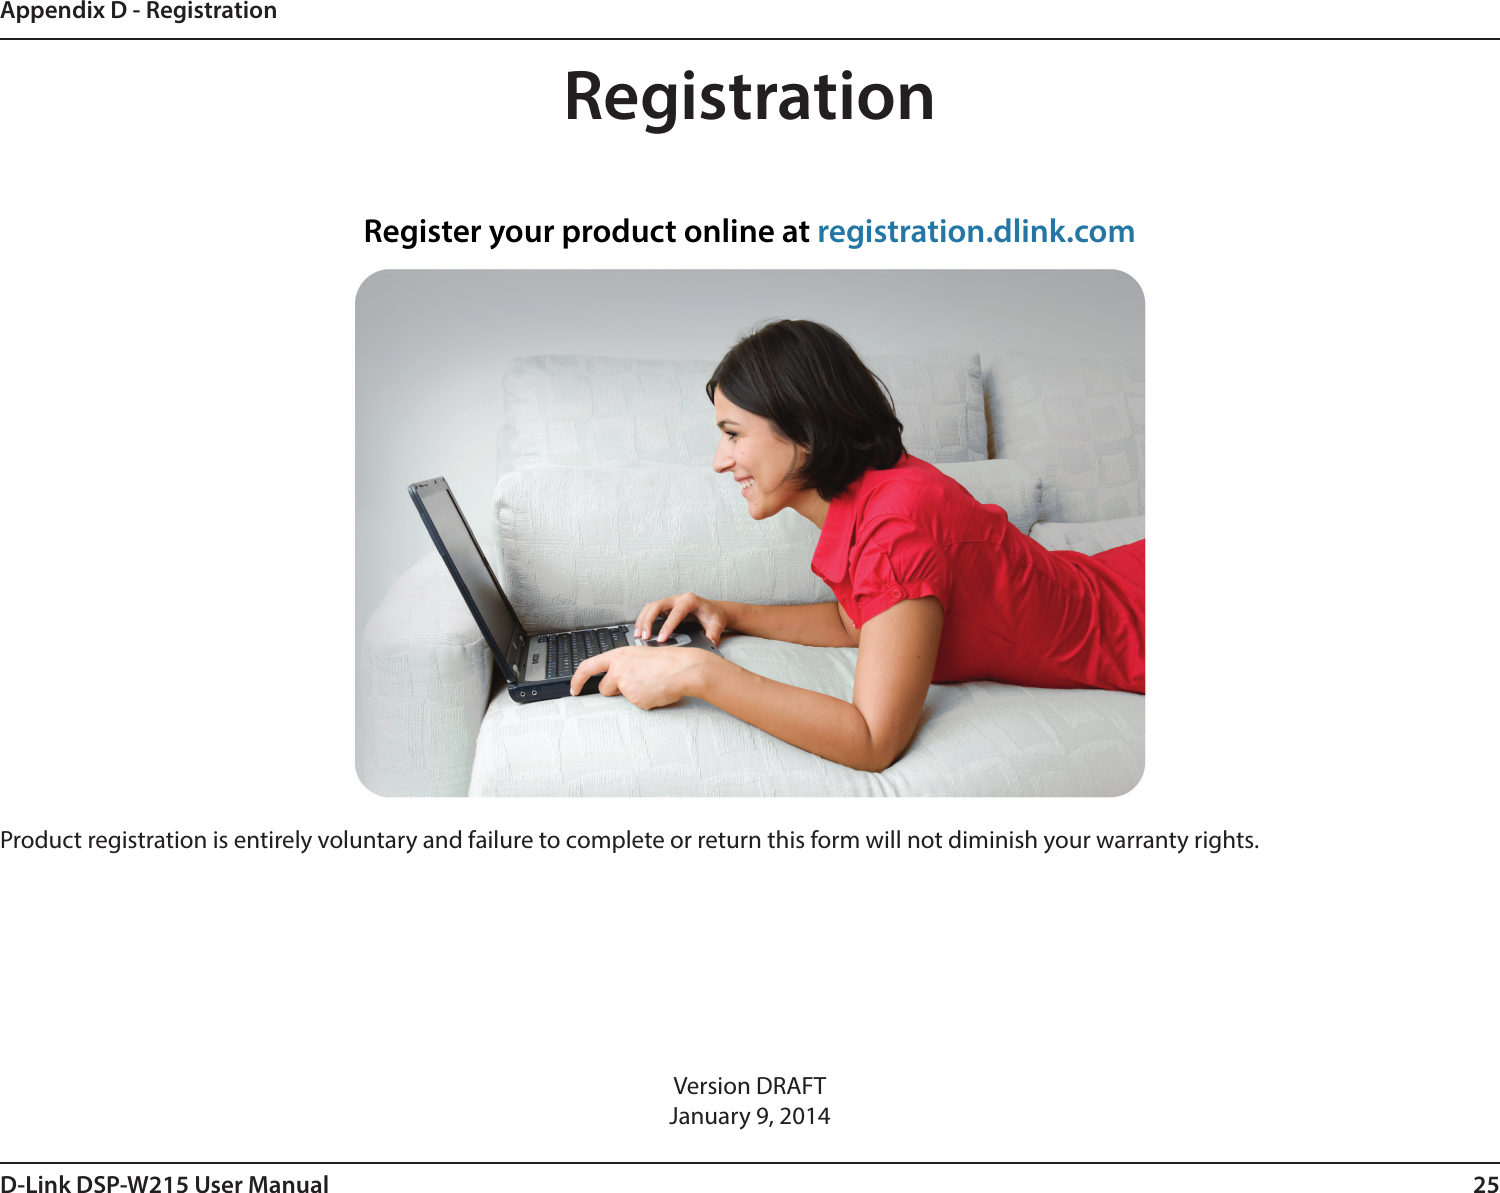 25D-Link DSP-W215 User ManualAppendix D - RegistrationVersion DRAFTJanuary 9, 2014Product registration is entirely voluntary and failure to complete or return this form will not diminish your warranty rights.RegistrationRegister your product online at registration.dlink.com